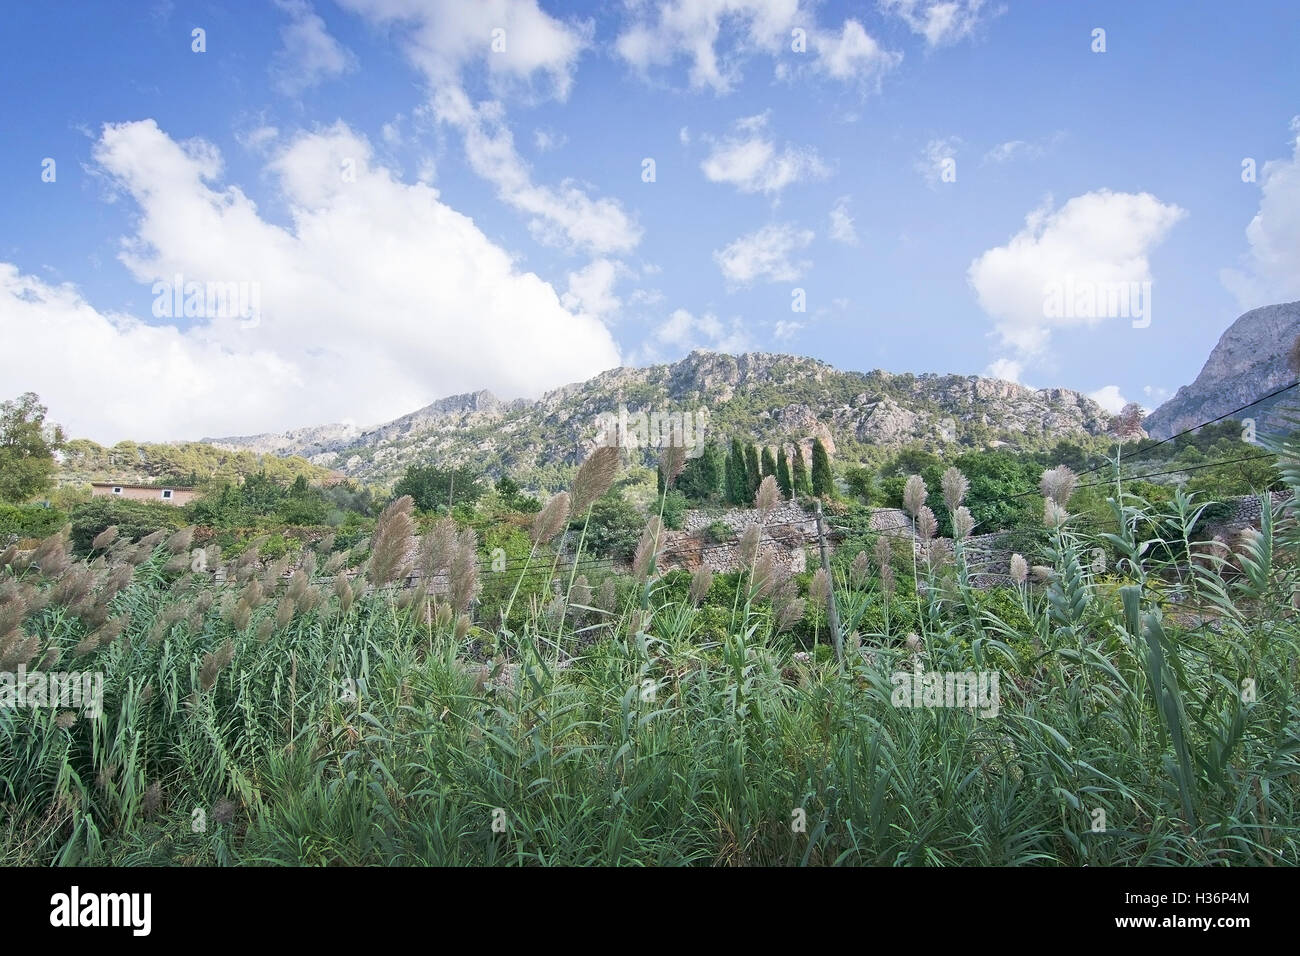 Autumn landscape with green reeds and mountains in Fornalutx, Mallorca, Balearic islands, Spain. Stock Photo